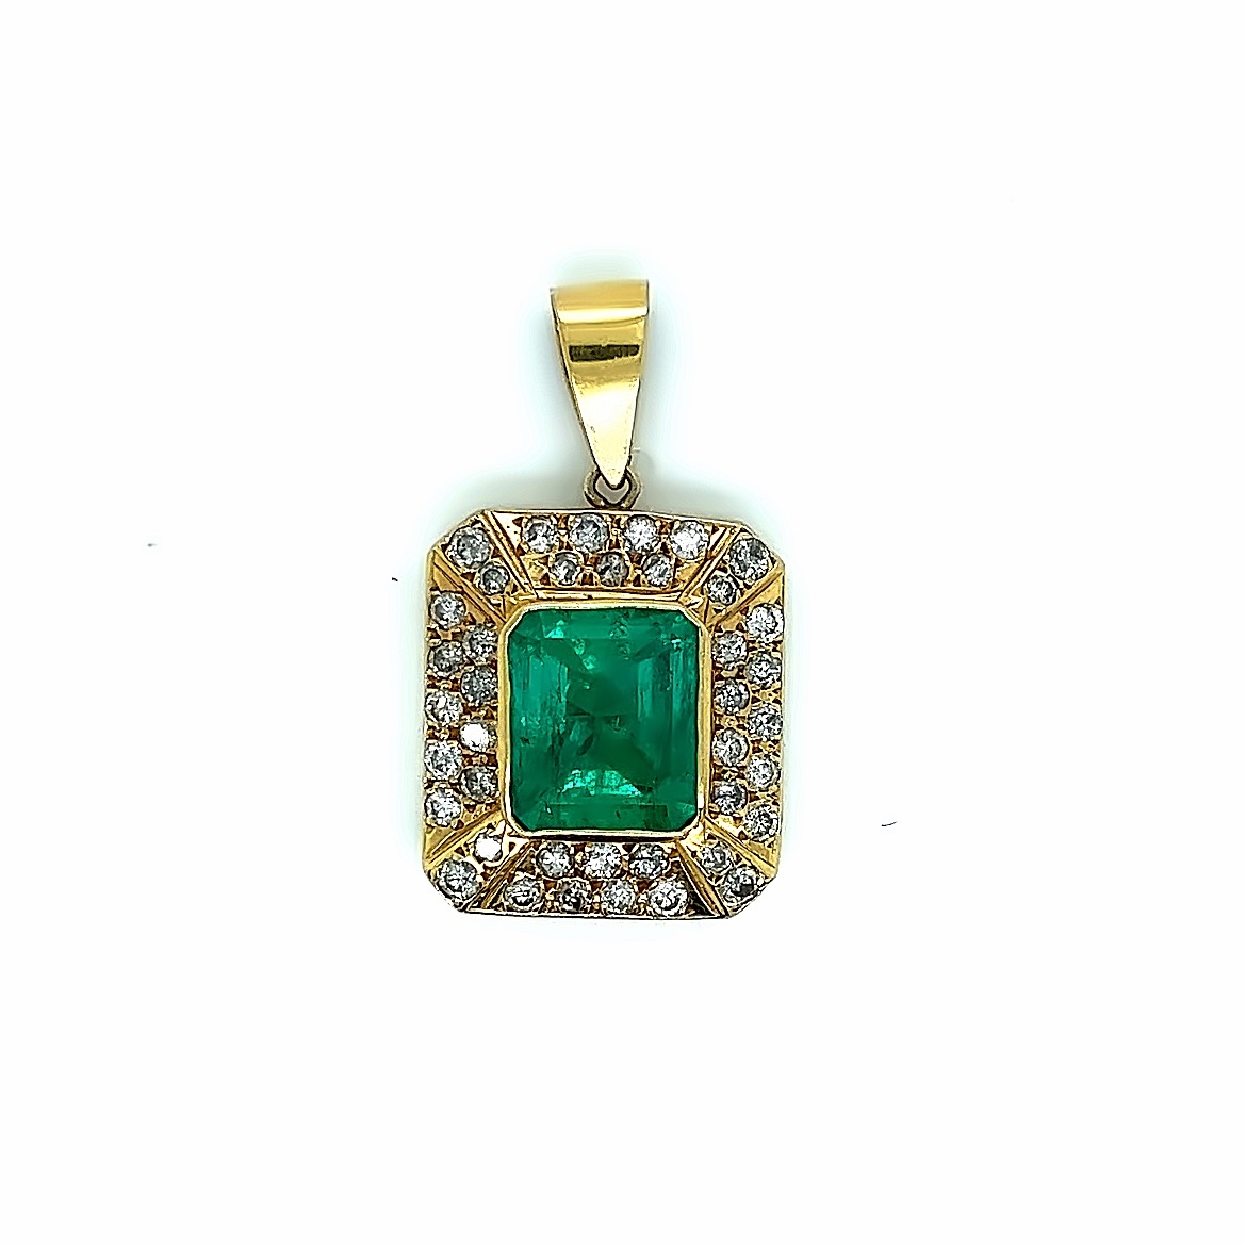 18K Yellow Gold Columbian Emerald and Diamond Pendant 1.5 Inches Long X .75 Inch Width

Approximately 7.90CT Emerald and 1.45CT Diamonds